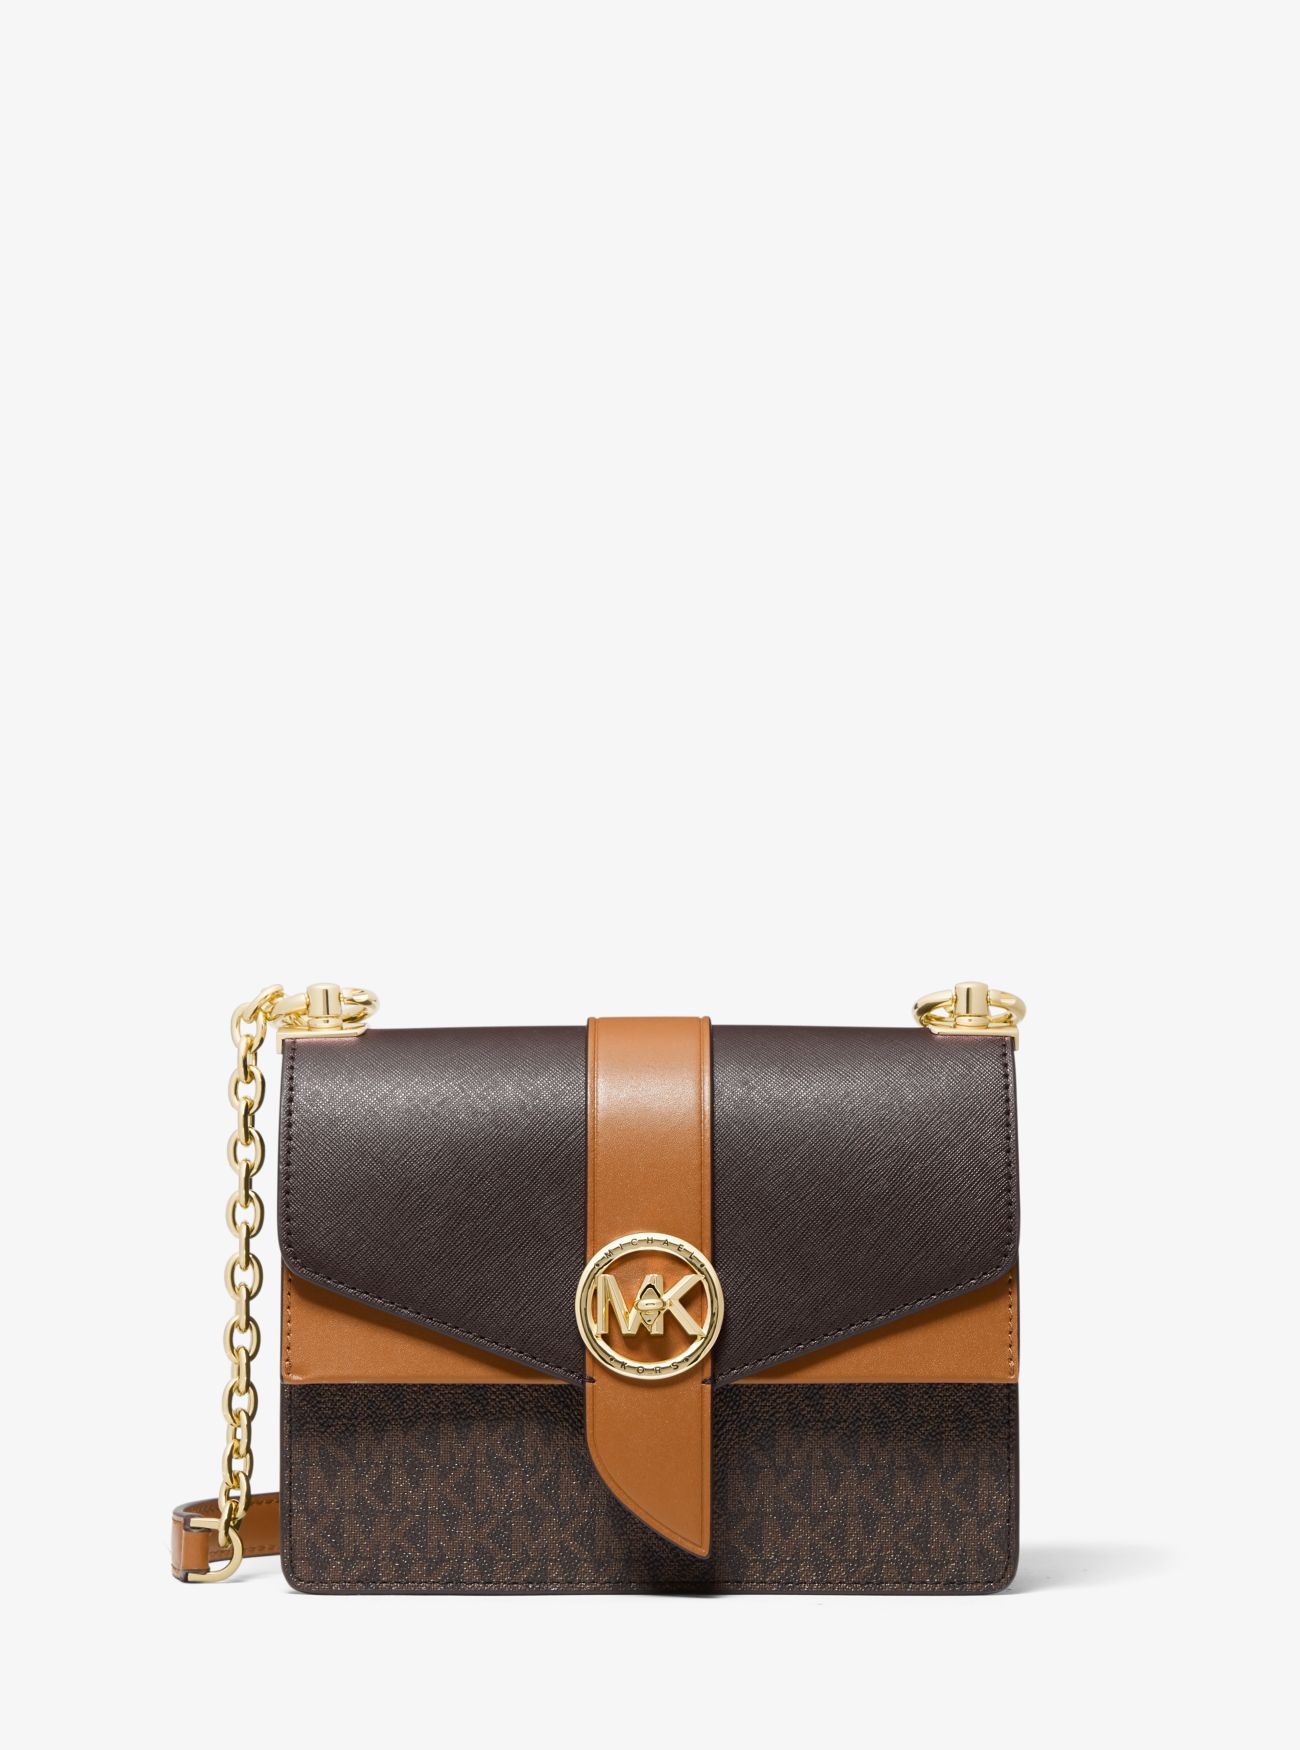 MK Greenwich Small Color-Block Logo and Saffiano Leather Crossbody Bag - Brown - Michael Kors